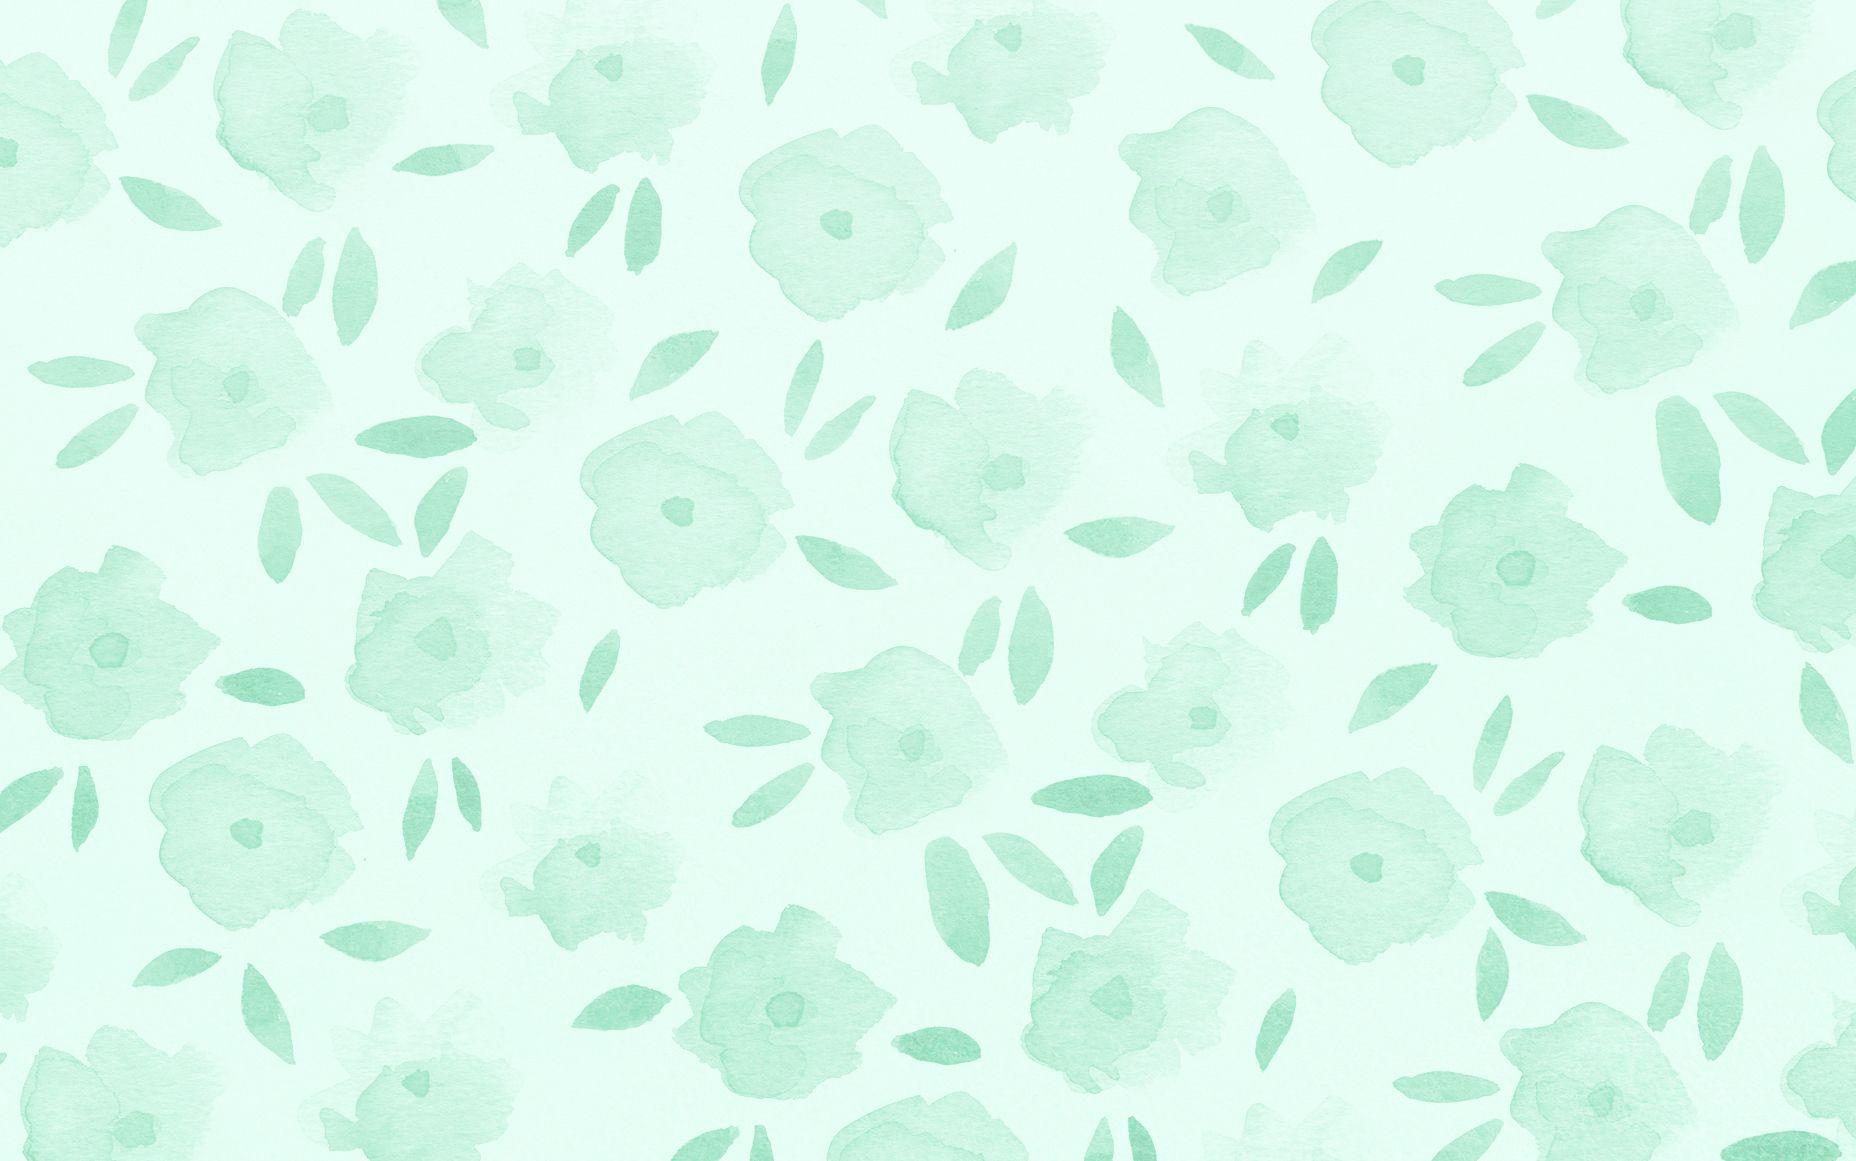 Mint Green Aesthetic Wallpapers Top Free Mint Green Aesthetic Backgrounds Wallpaperaccess 1536 x 1525 jpeg 116 kb. mint green aesthetic wallpapers top